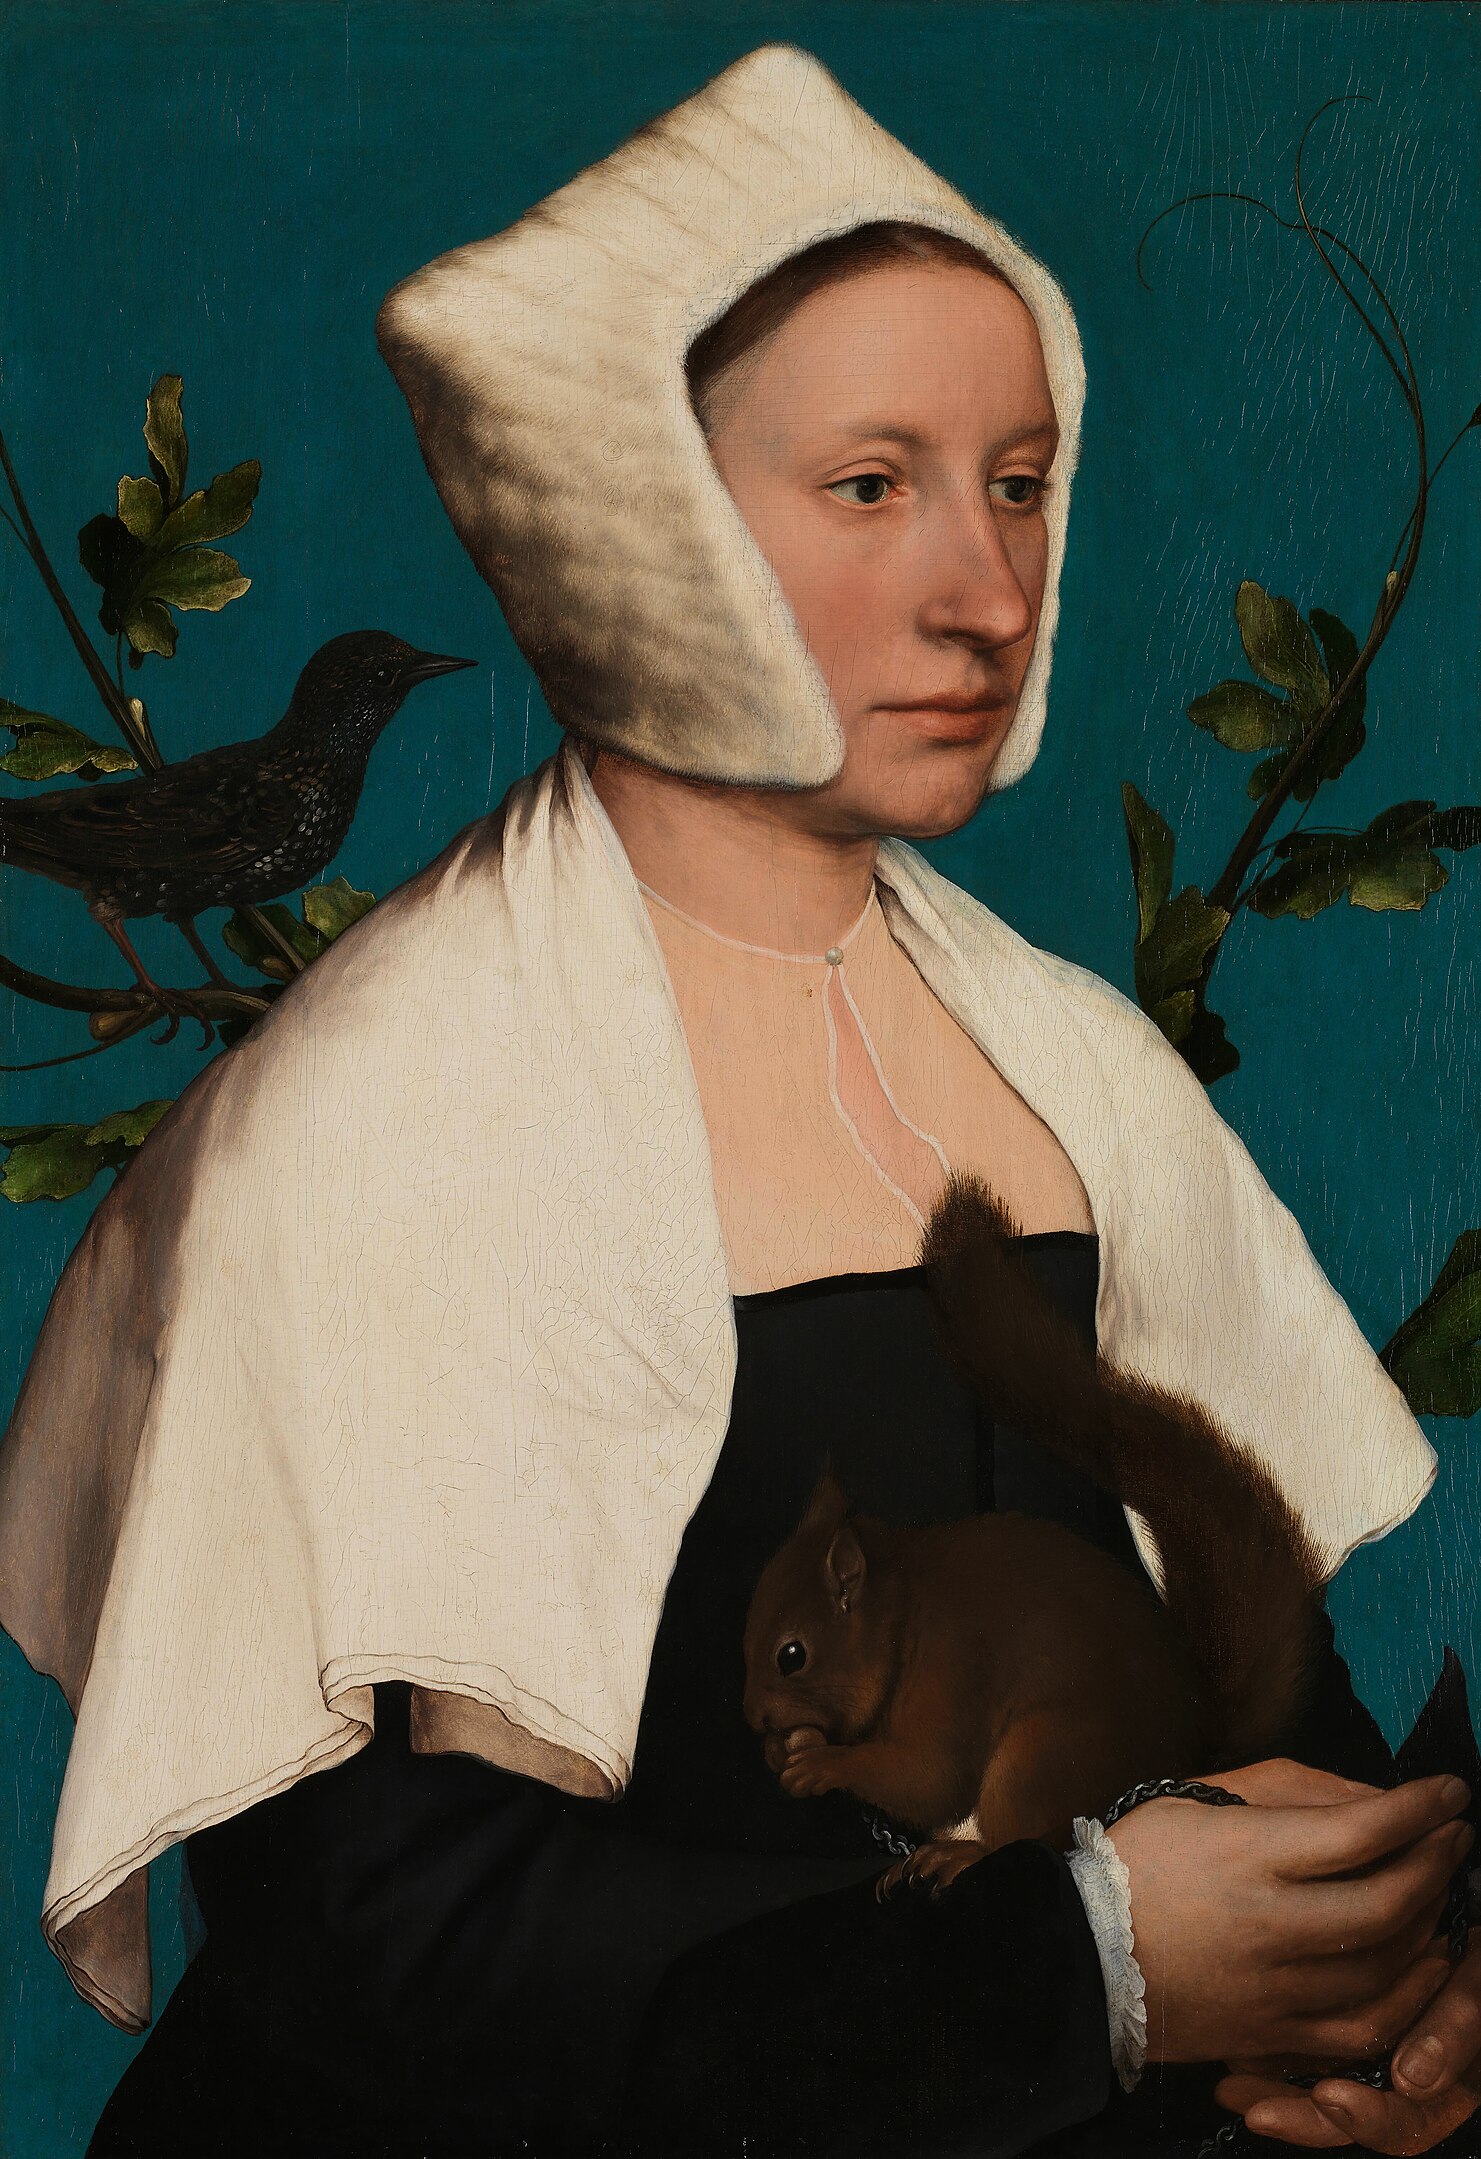 A Lady With a Squirrel and a Starling by Hans Holbein the Younger - about 1526-1528 - 56 x 38.8 cm National Gallery